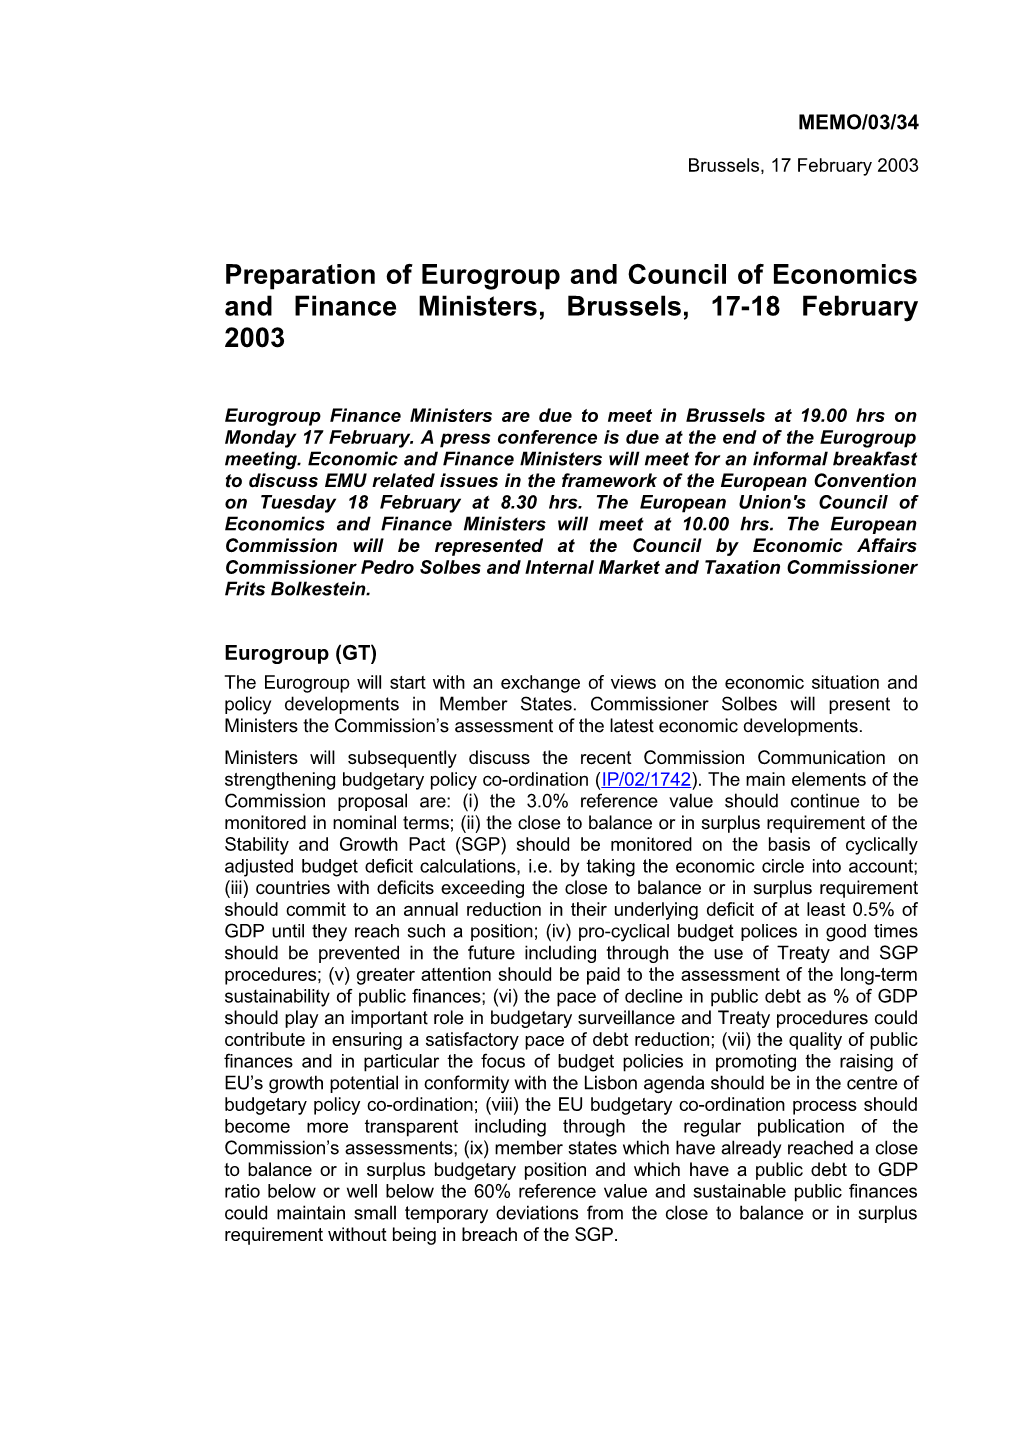 Preparation of Eurogroup and Council of Economics and Finance Ministers, Brussels, 17-18